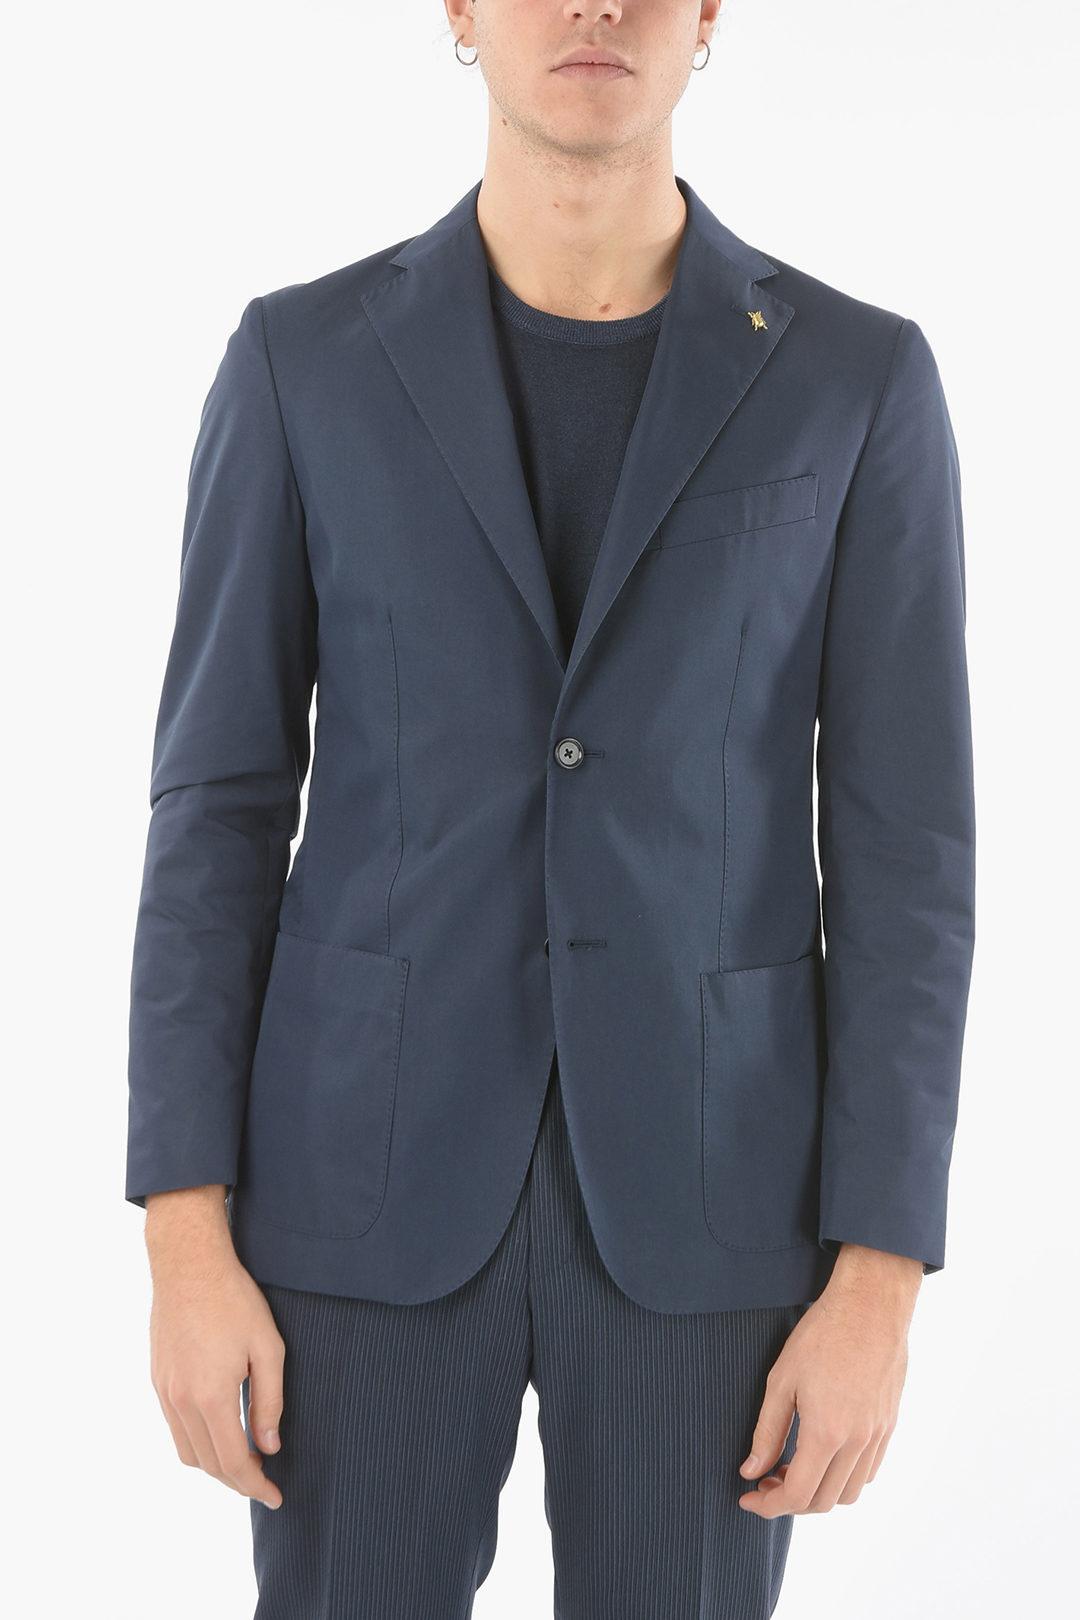 Corneliani CC COLLECTION side vents REFINED 2-button blazer with Golden ...